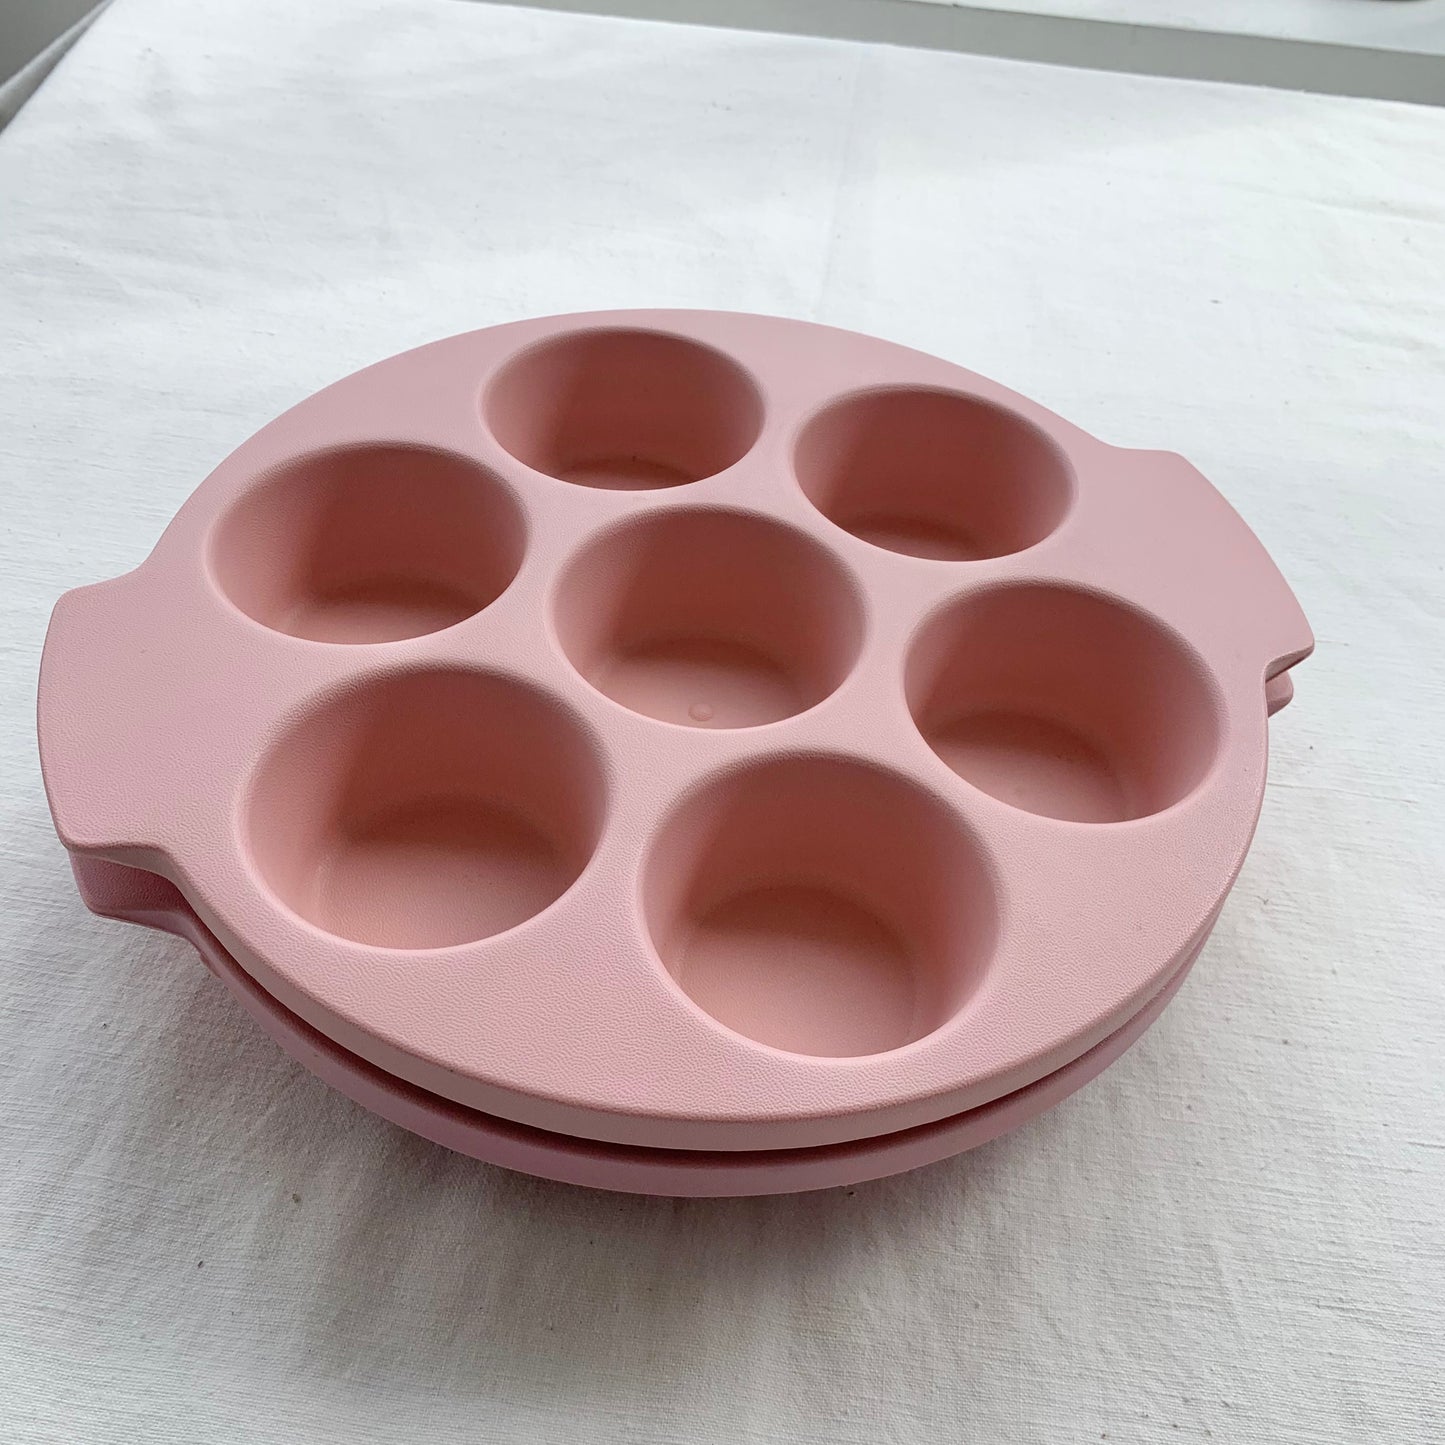 Vintage 80's Microwave Cupcake/Muffin tray